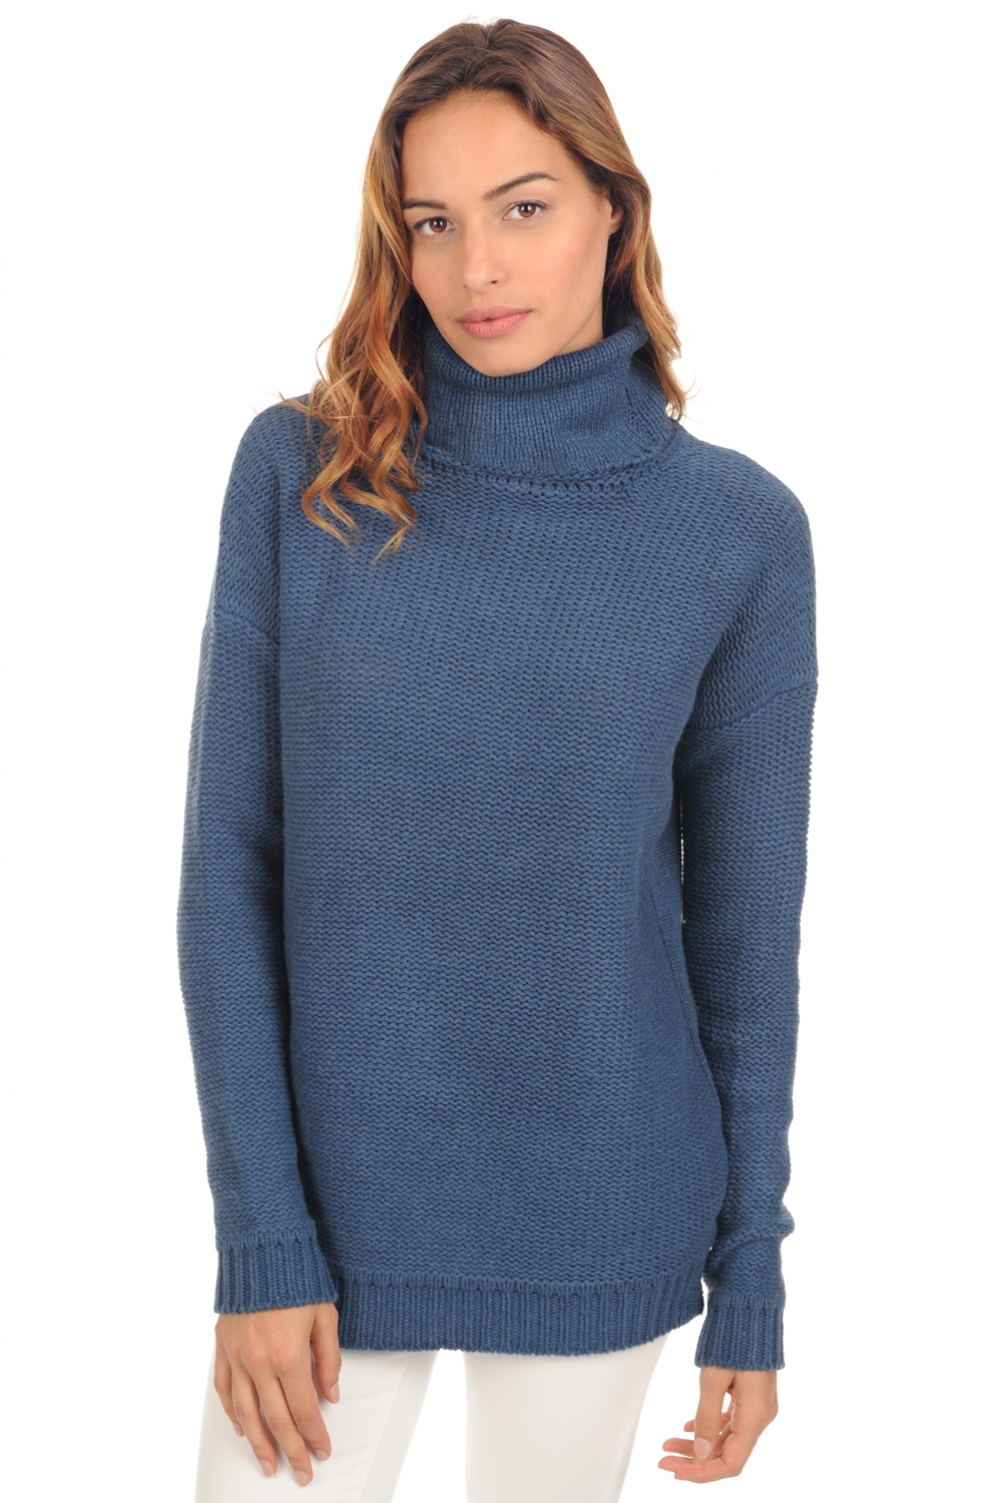 Yak pull femme ygritte bleu stellaire t3